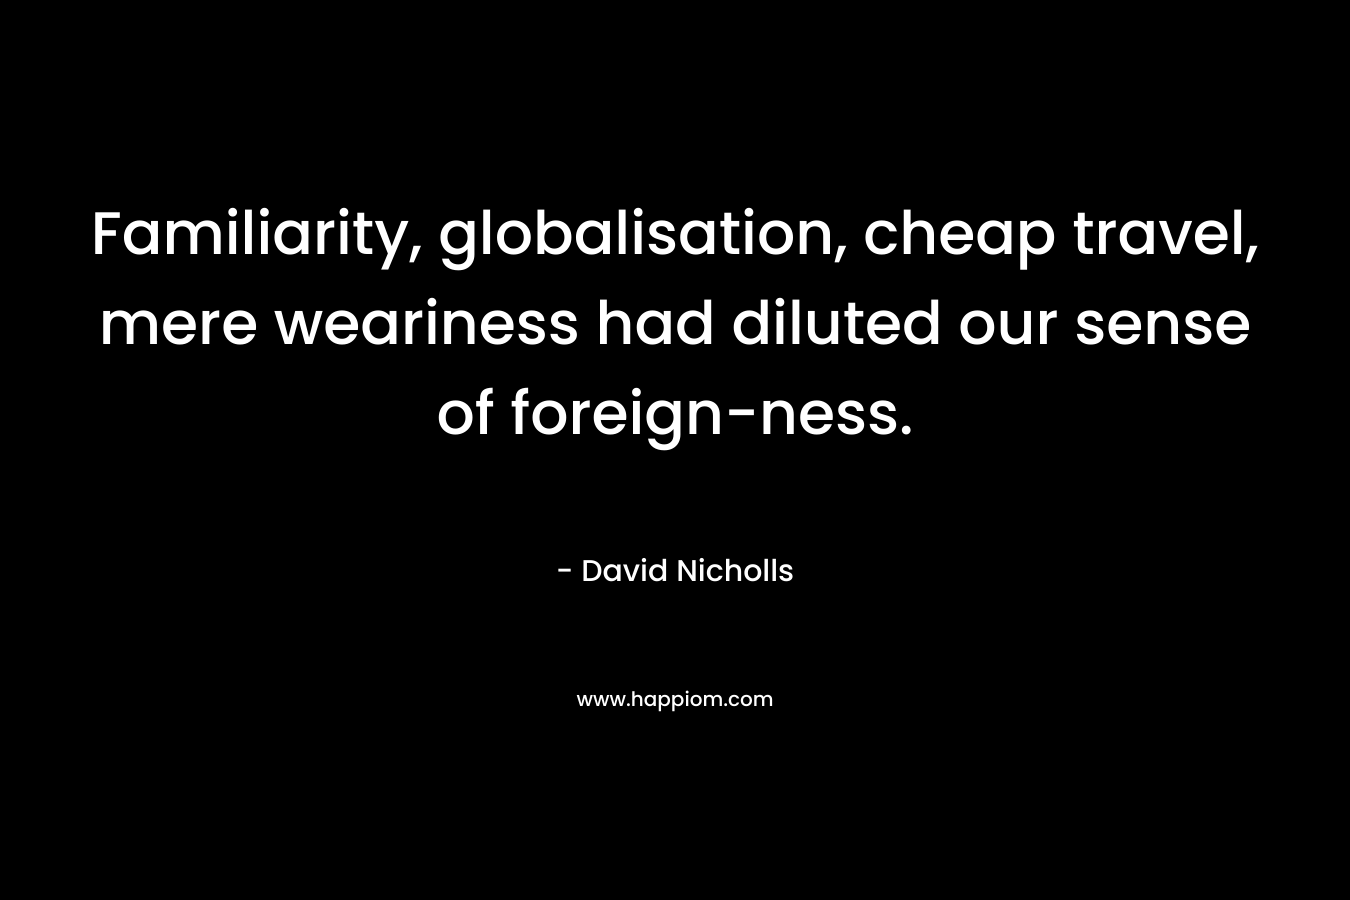 Familiarity, globalisation, cheap travel, mere weariness had diluted our sense of foreign-ness. – David Nicholls